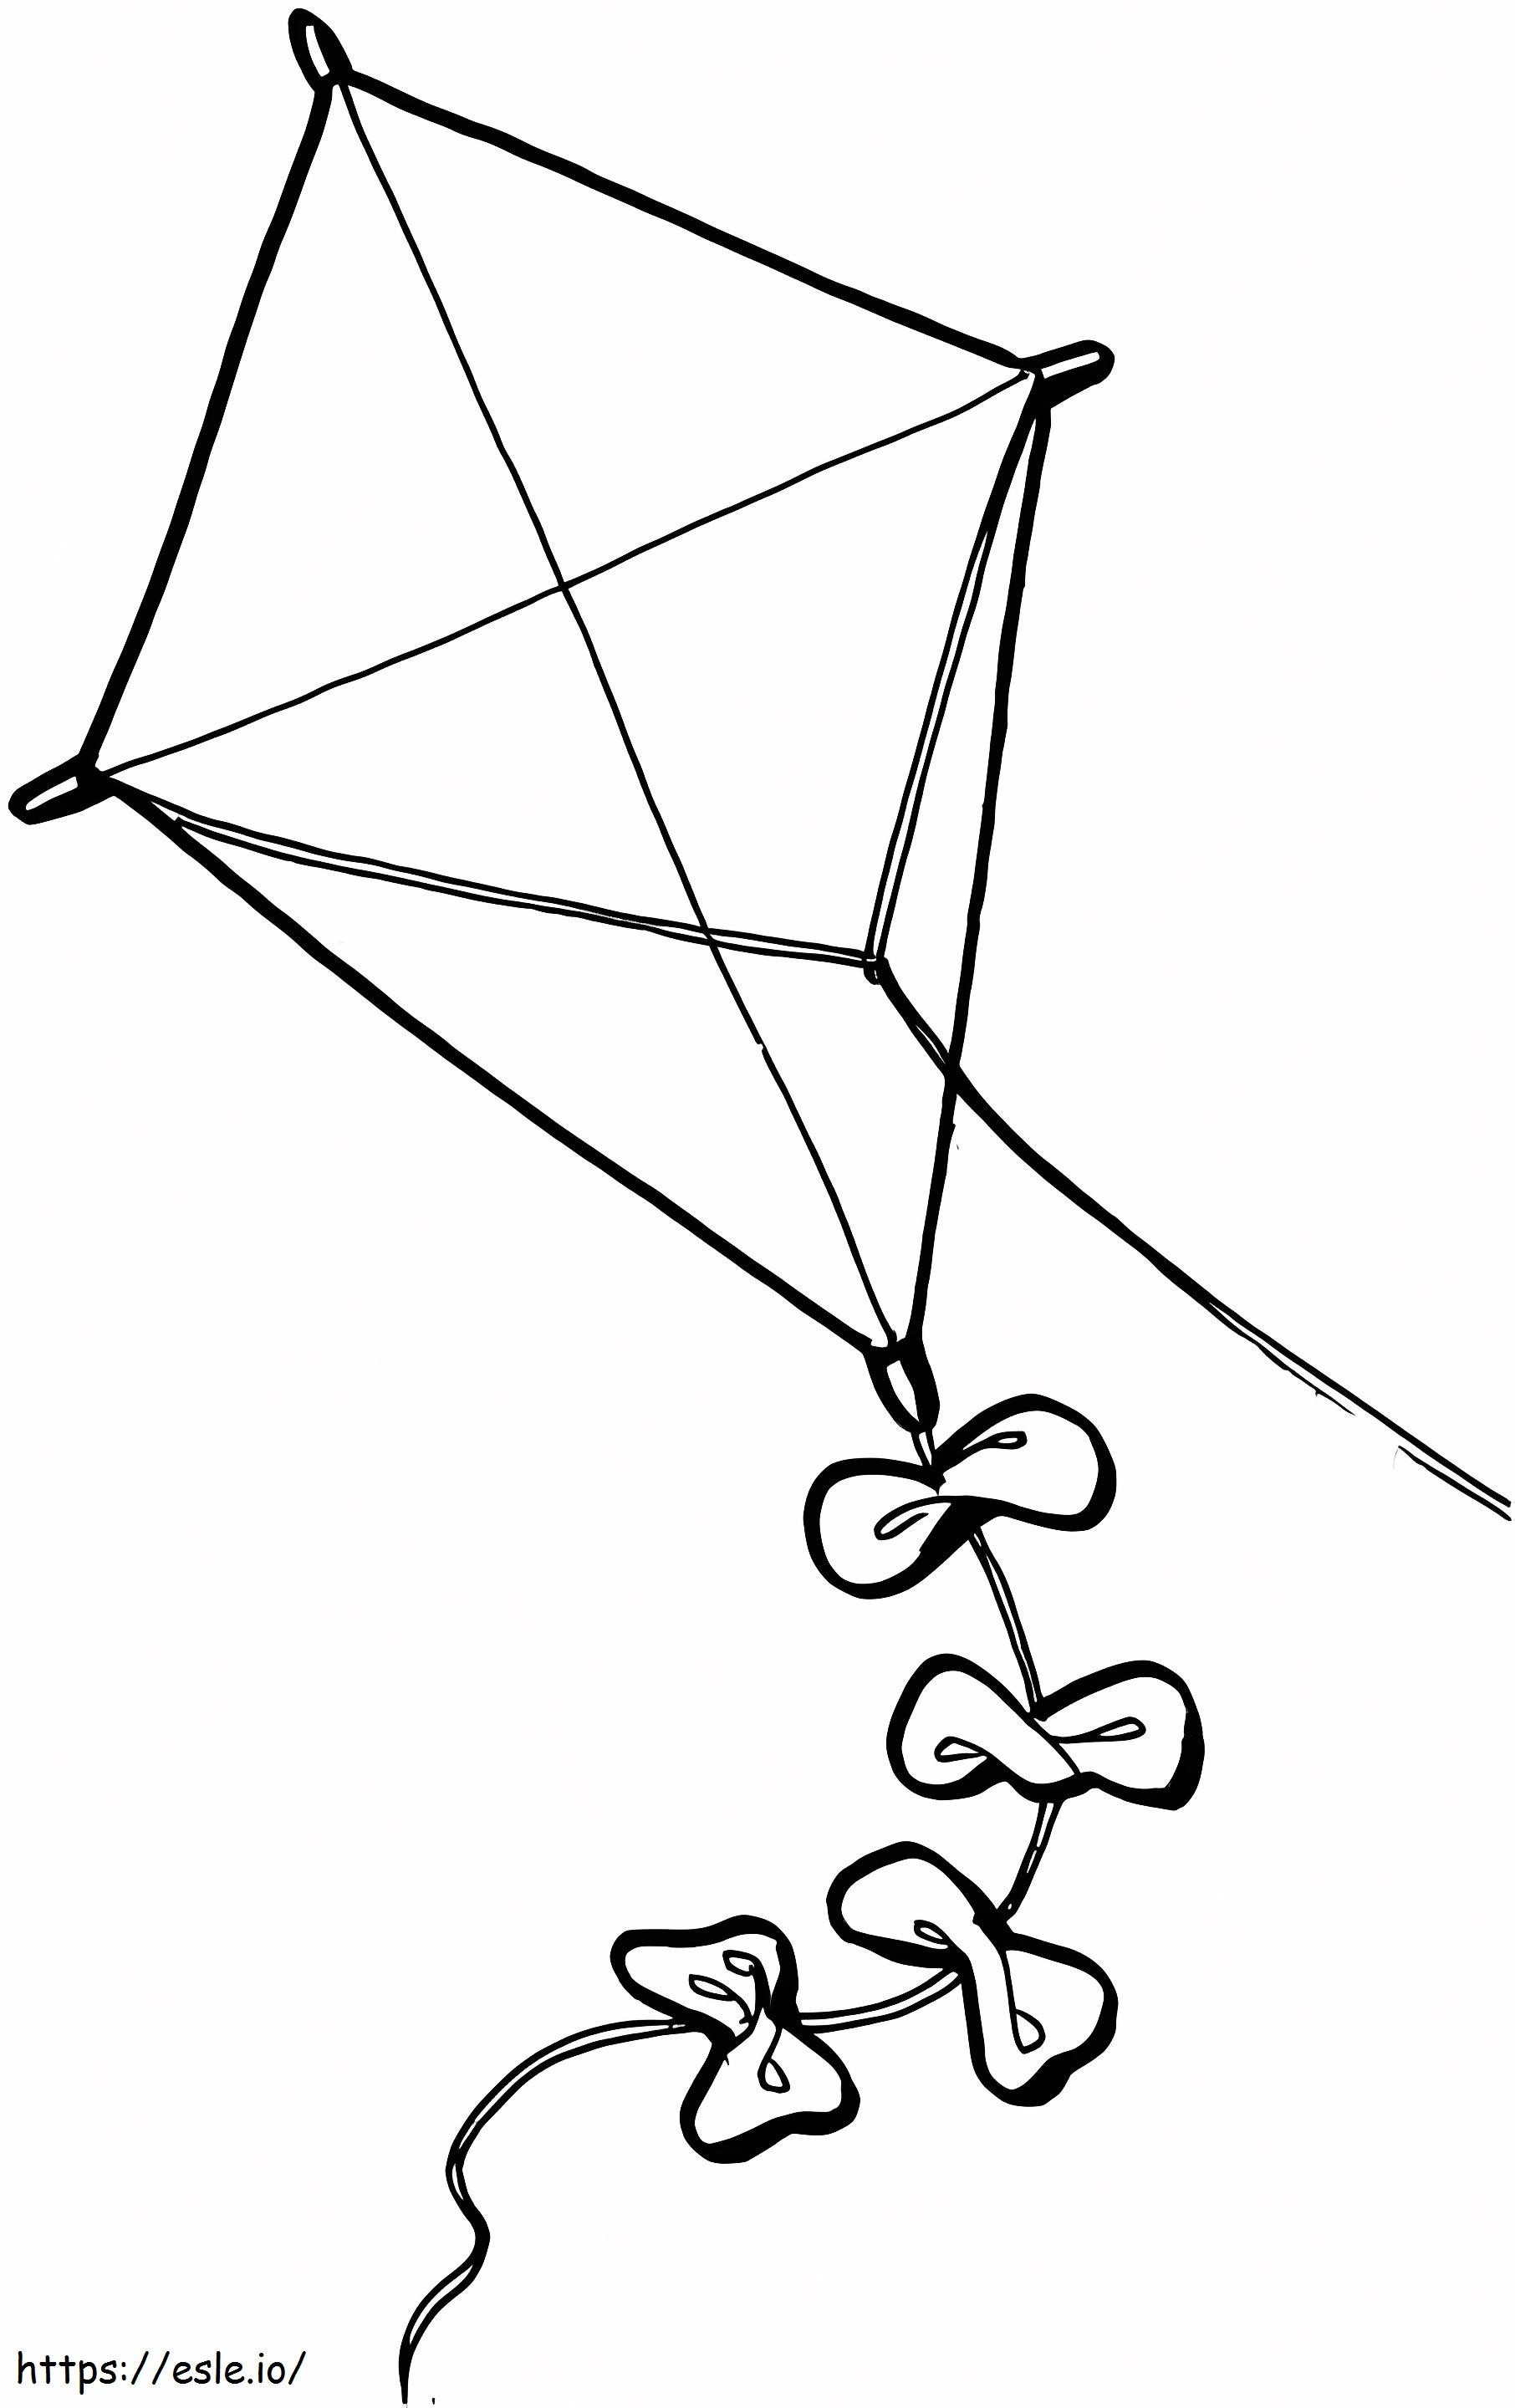 Kite 9 coloring page